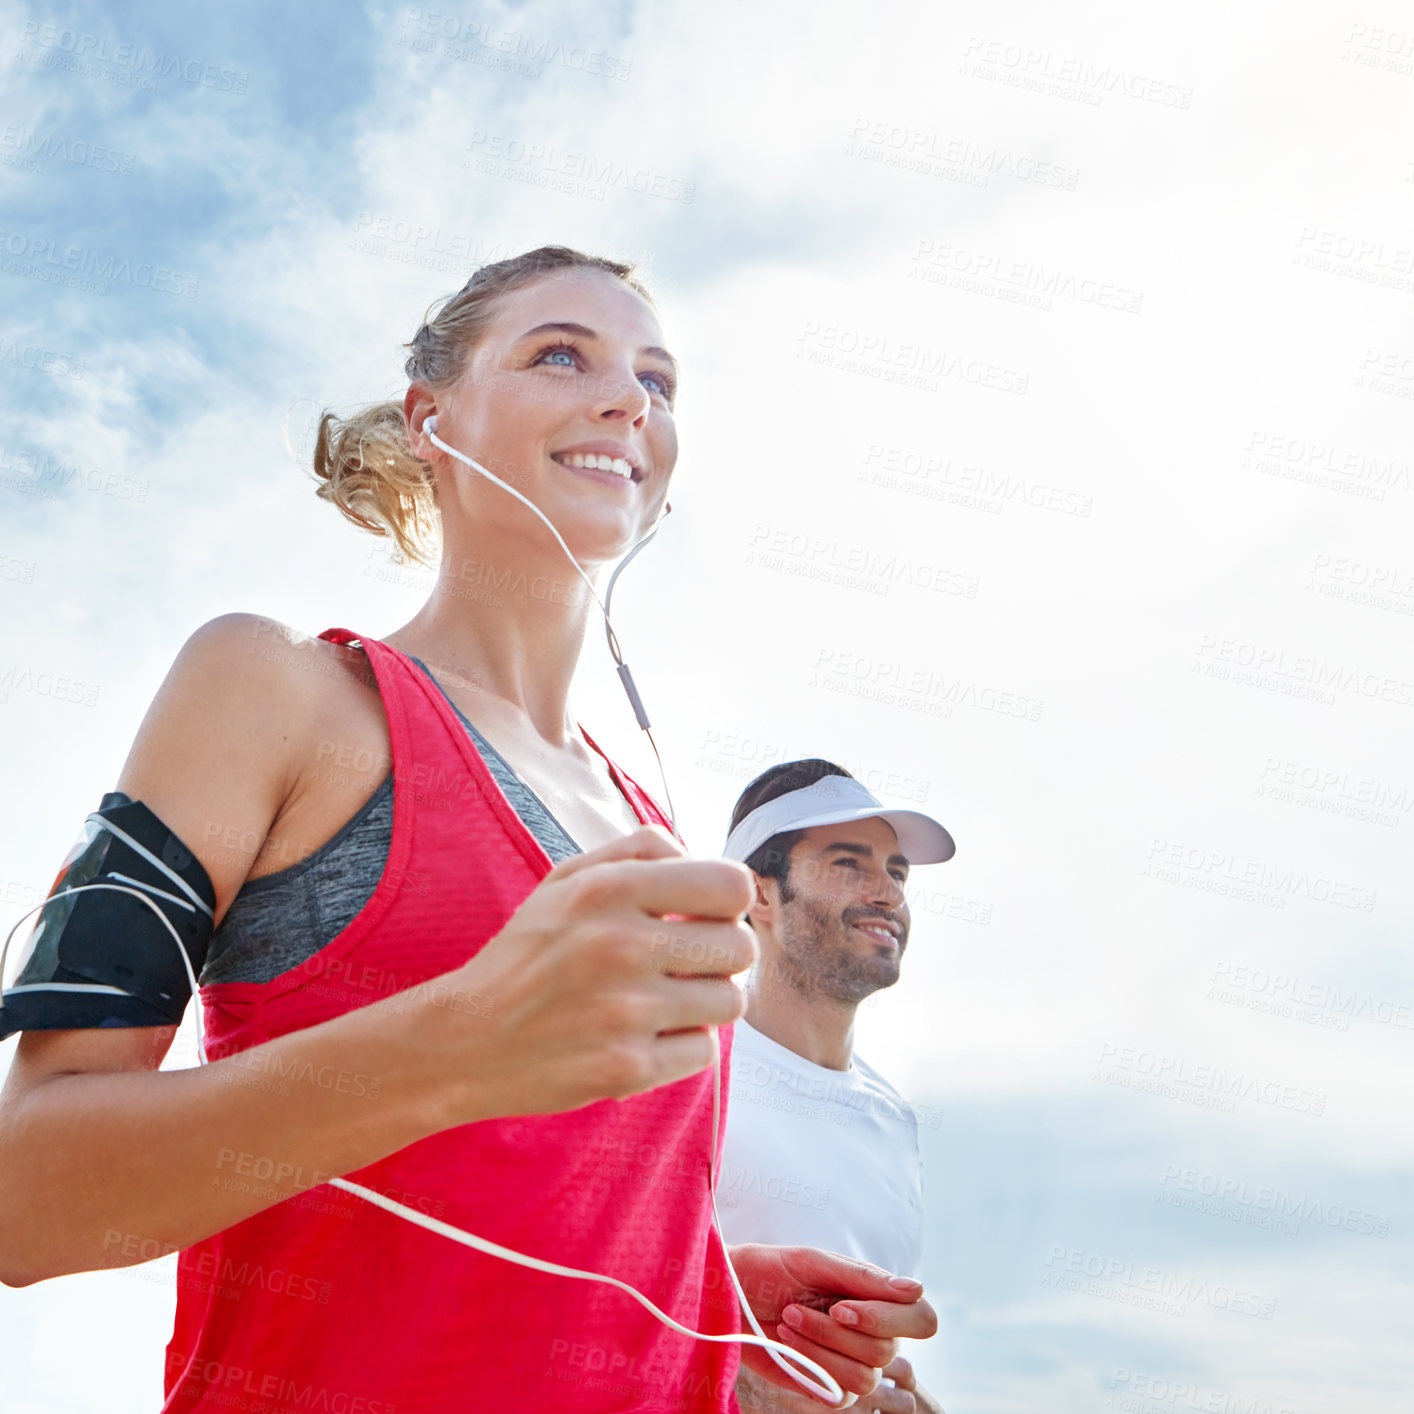 Buy stock photo Shot of a young couple going for a run together